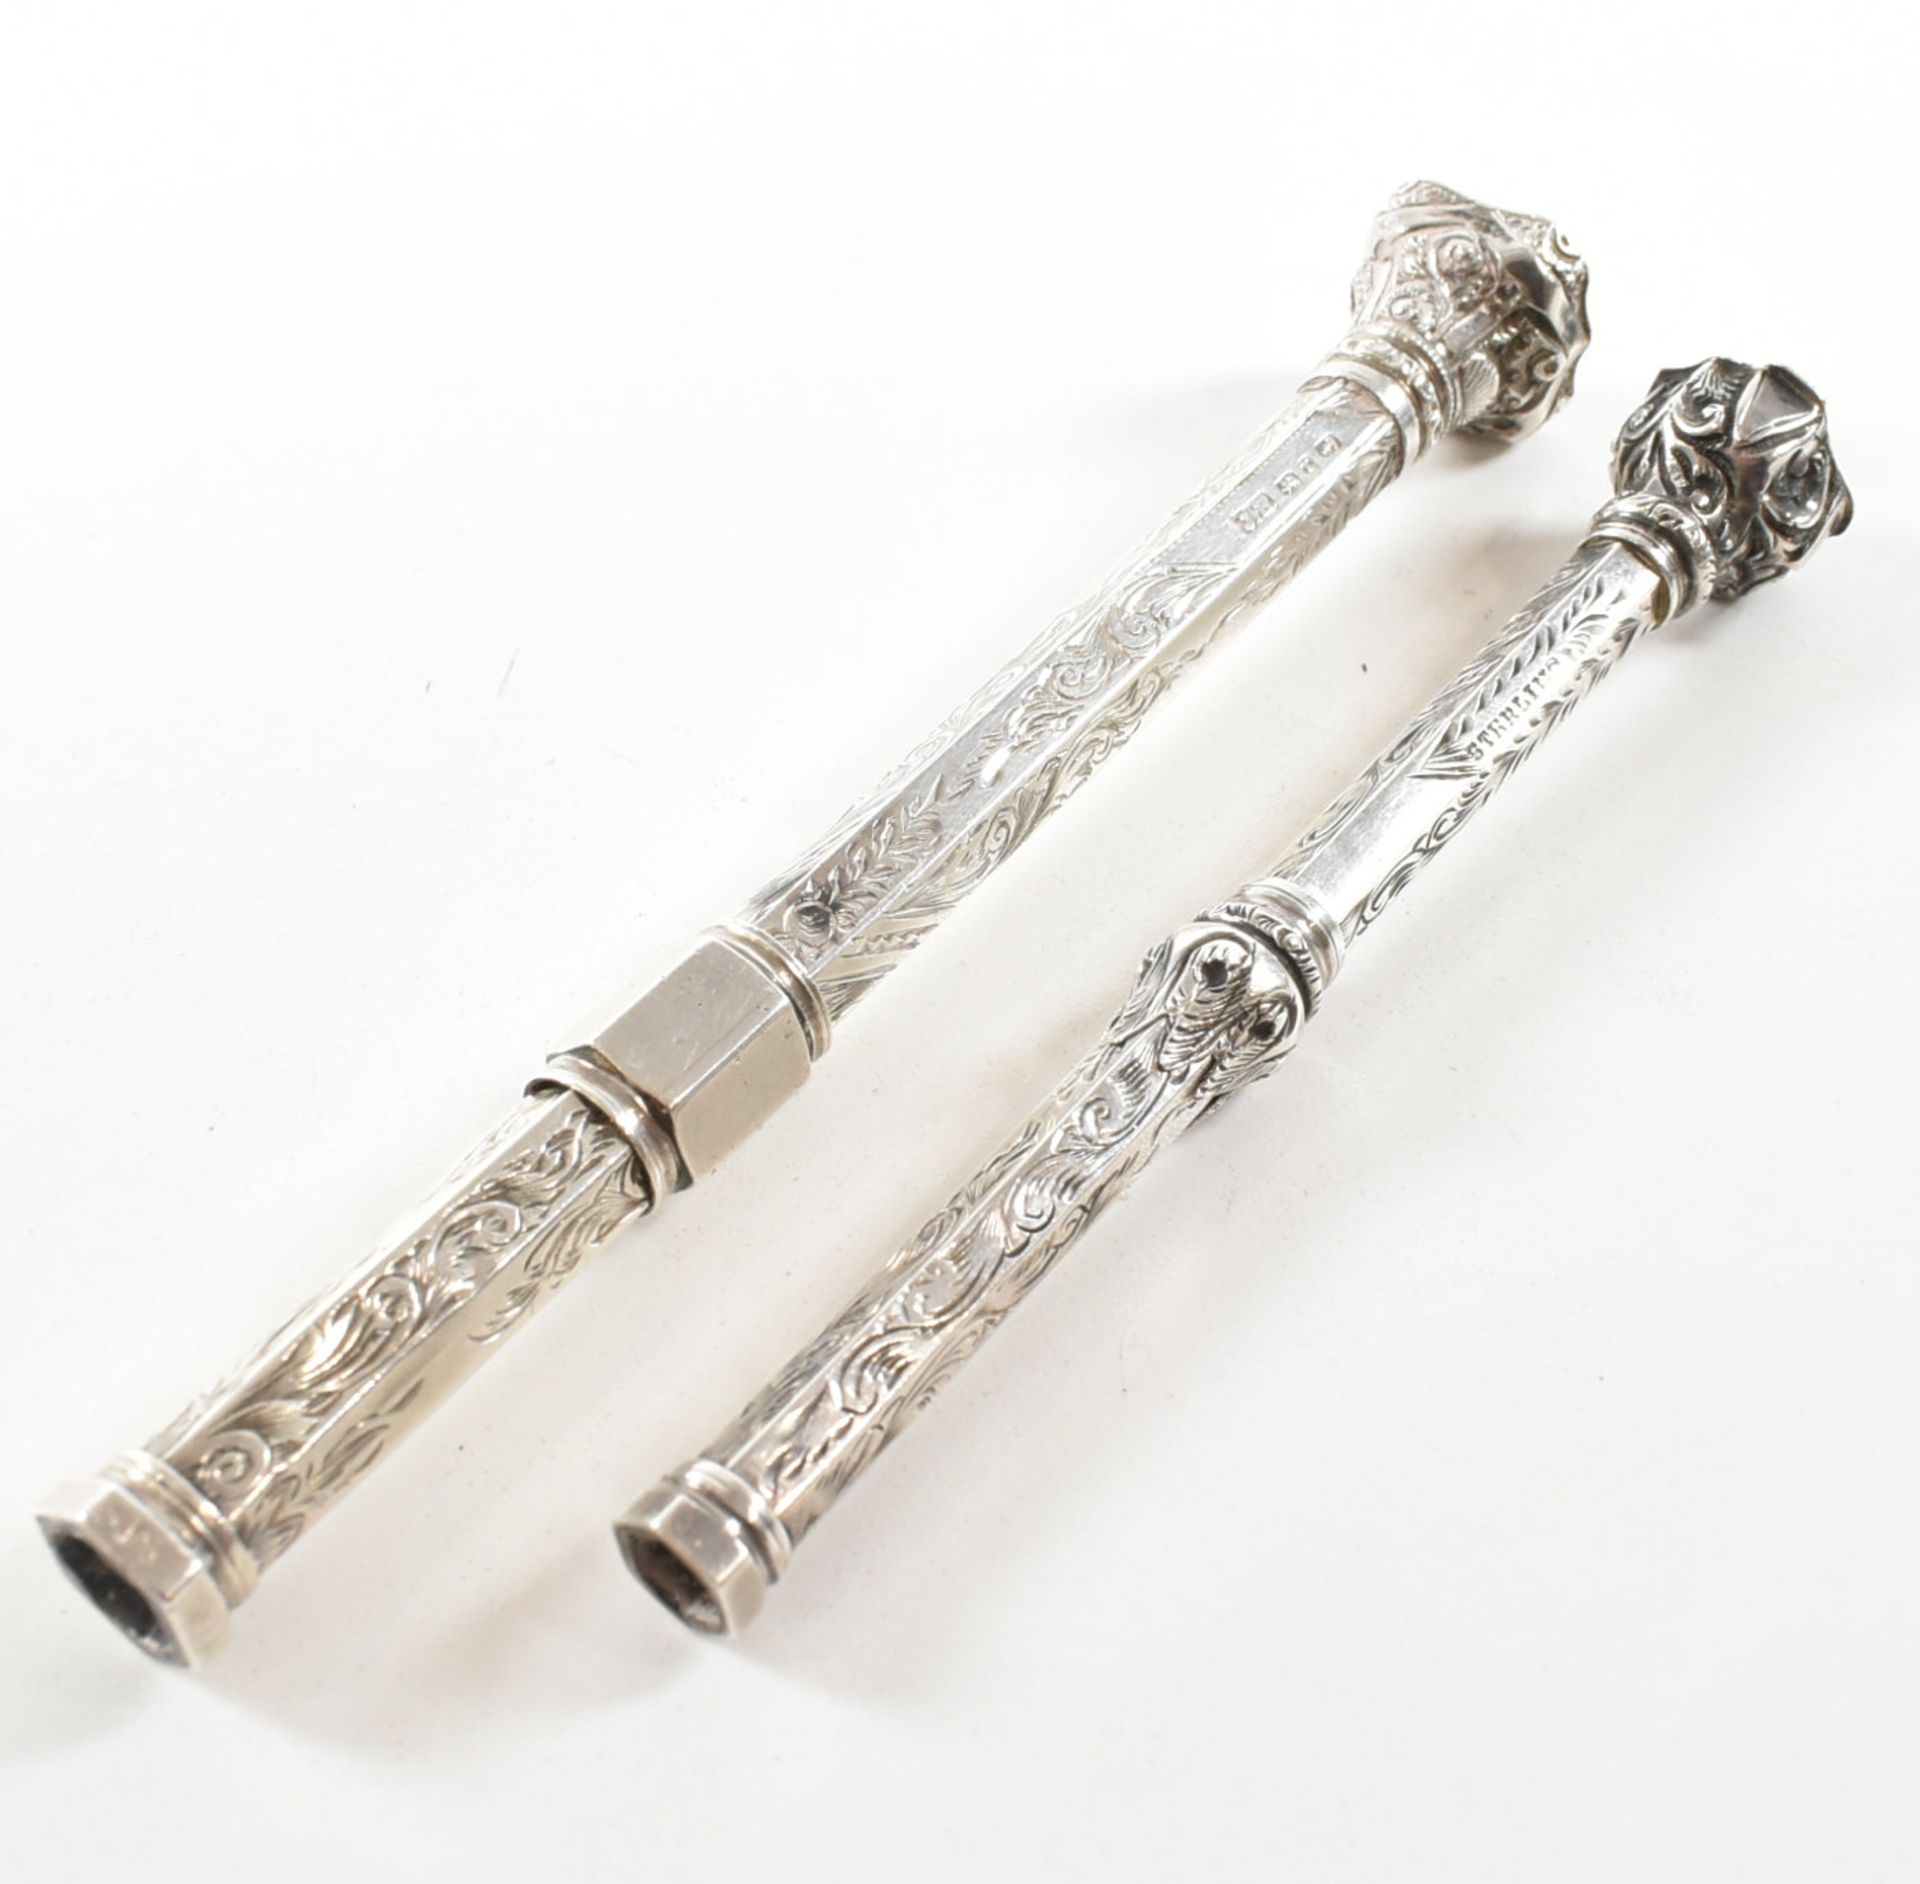 TWO SILVER PROPELLING PENCILS WITH BLOODSTONE SEALS - Image 9 of 10